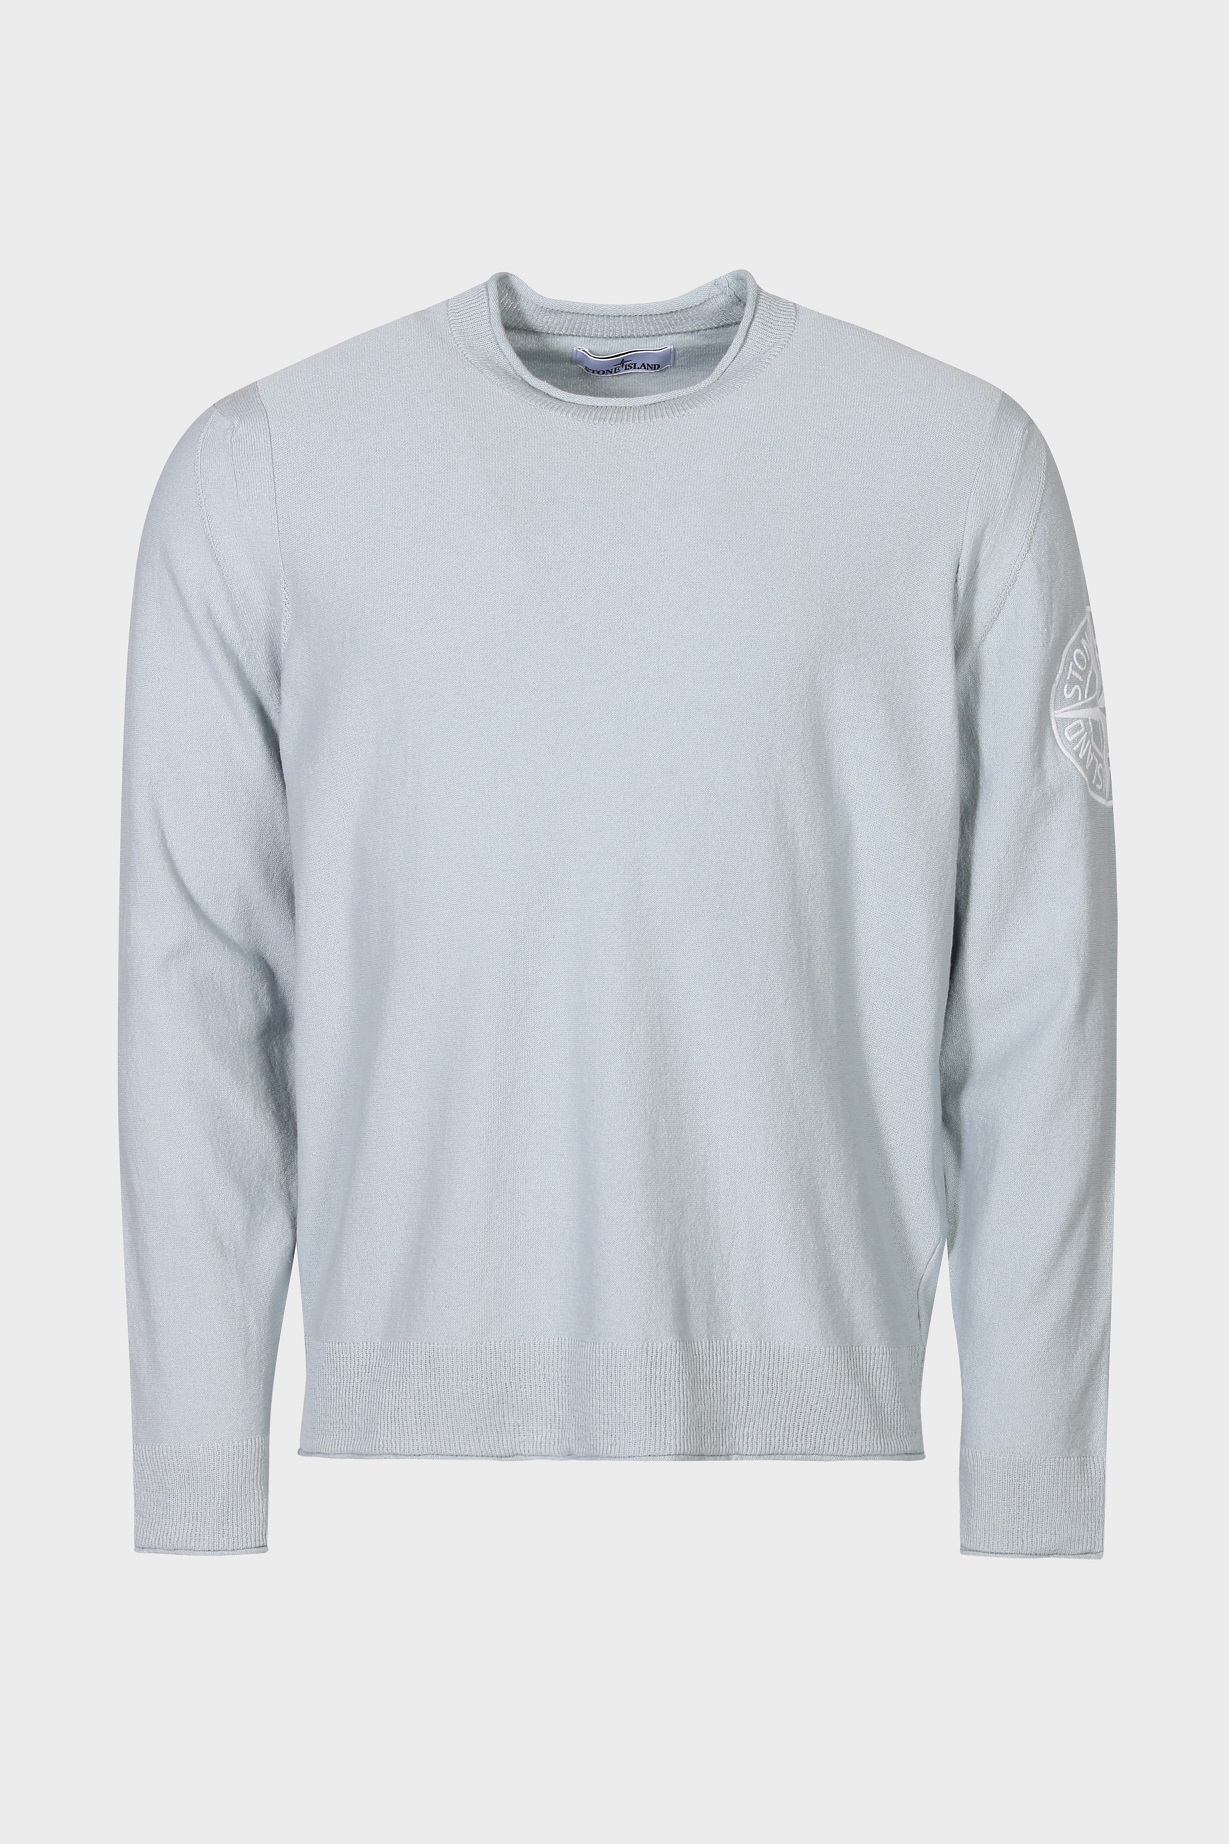 STONE ISLAND Cotton Knit Pullover in Sky Blue 2XL